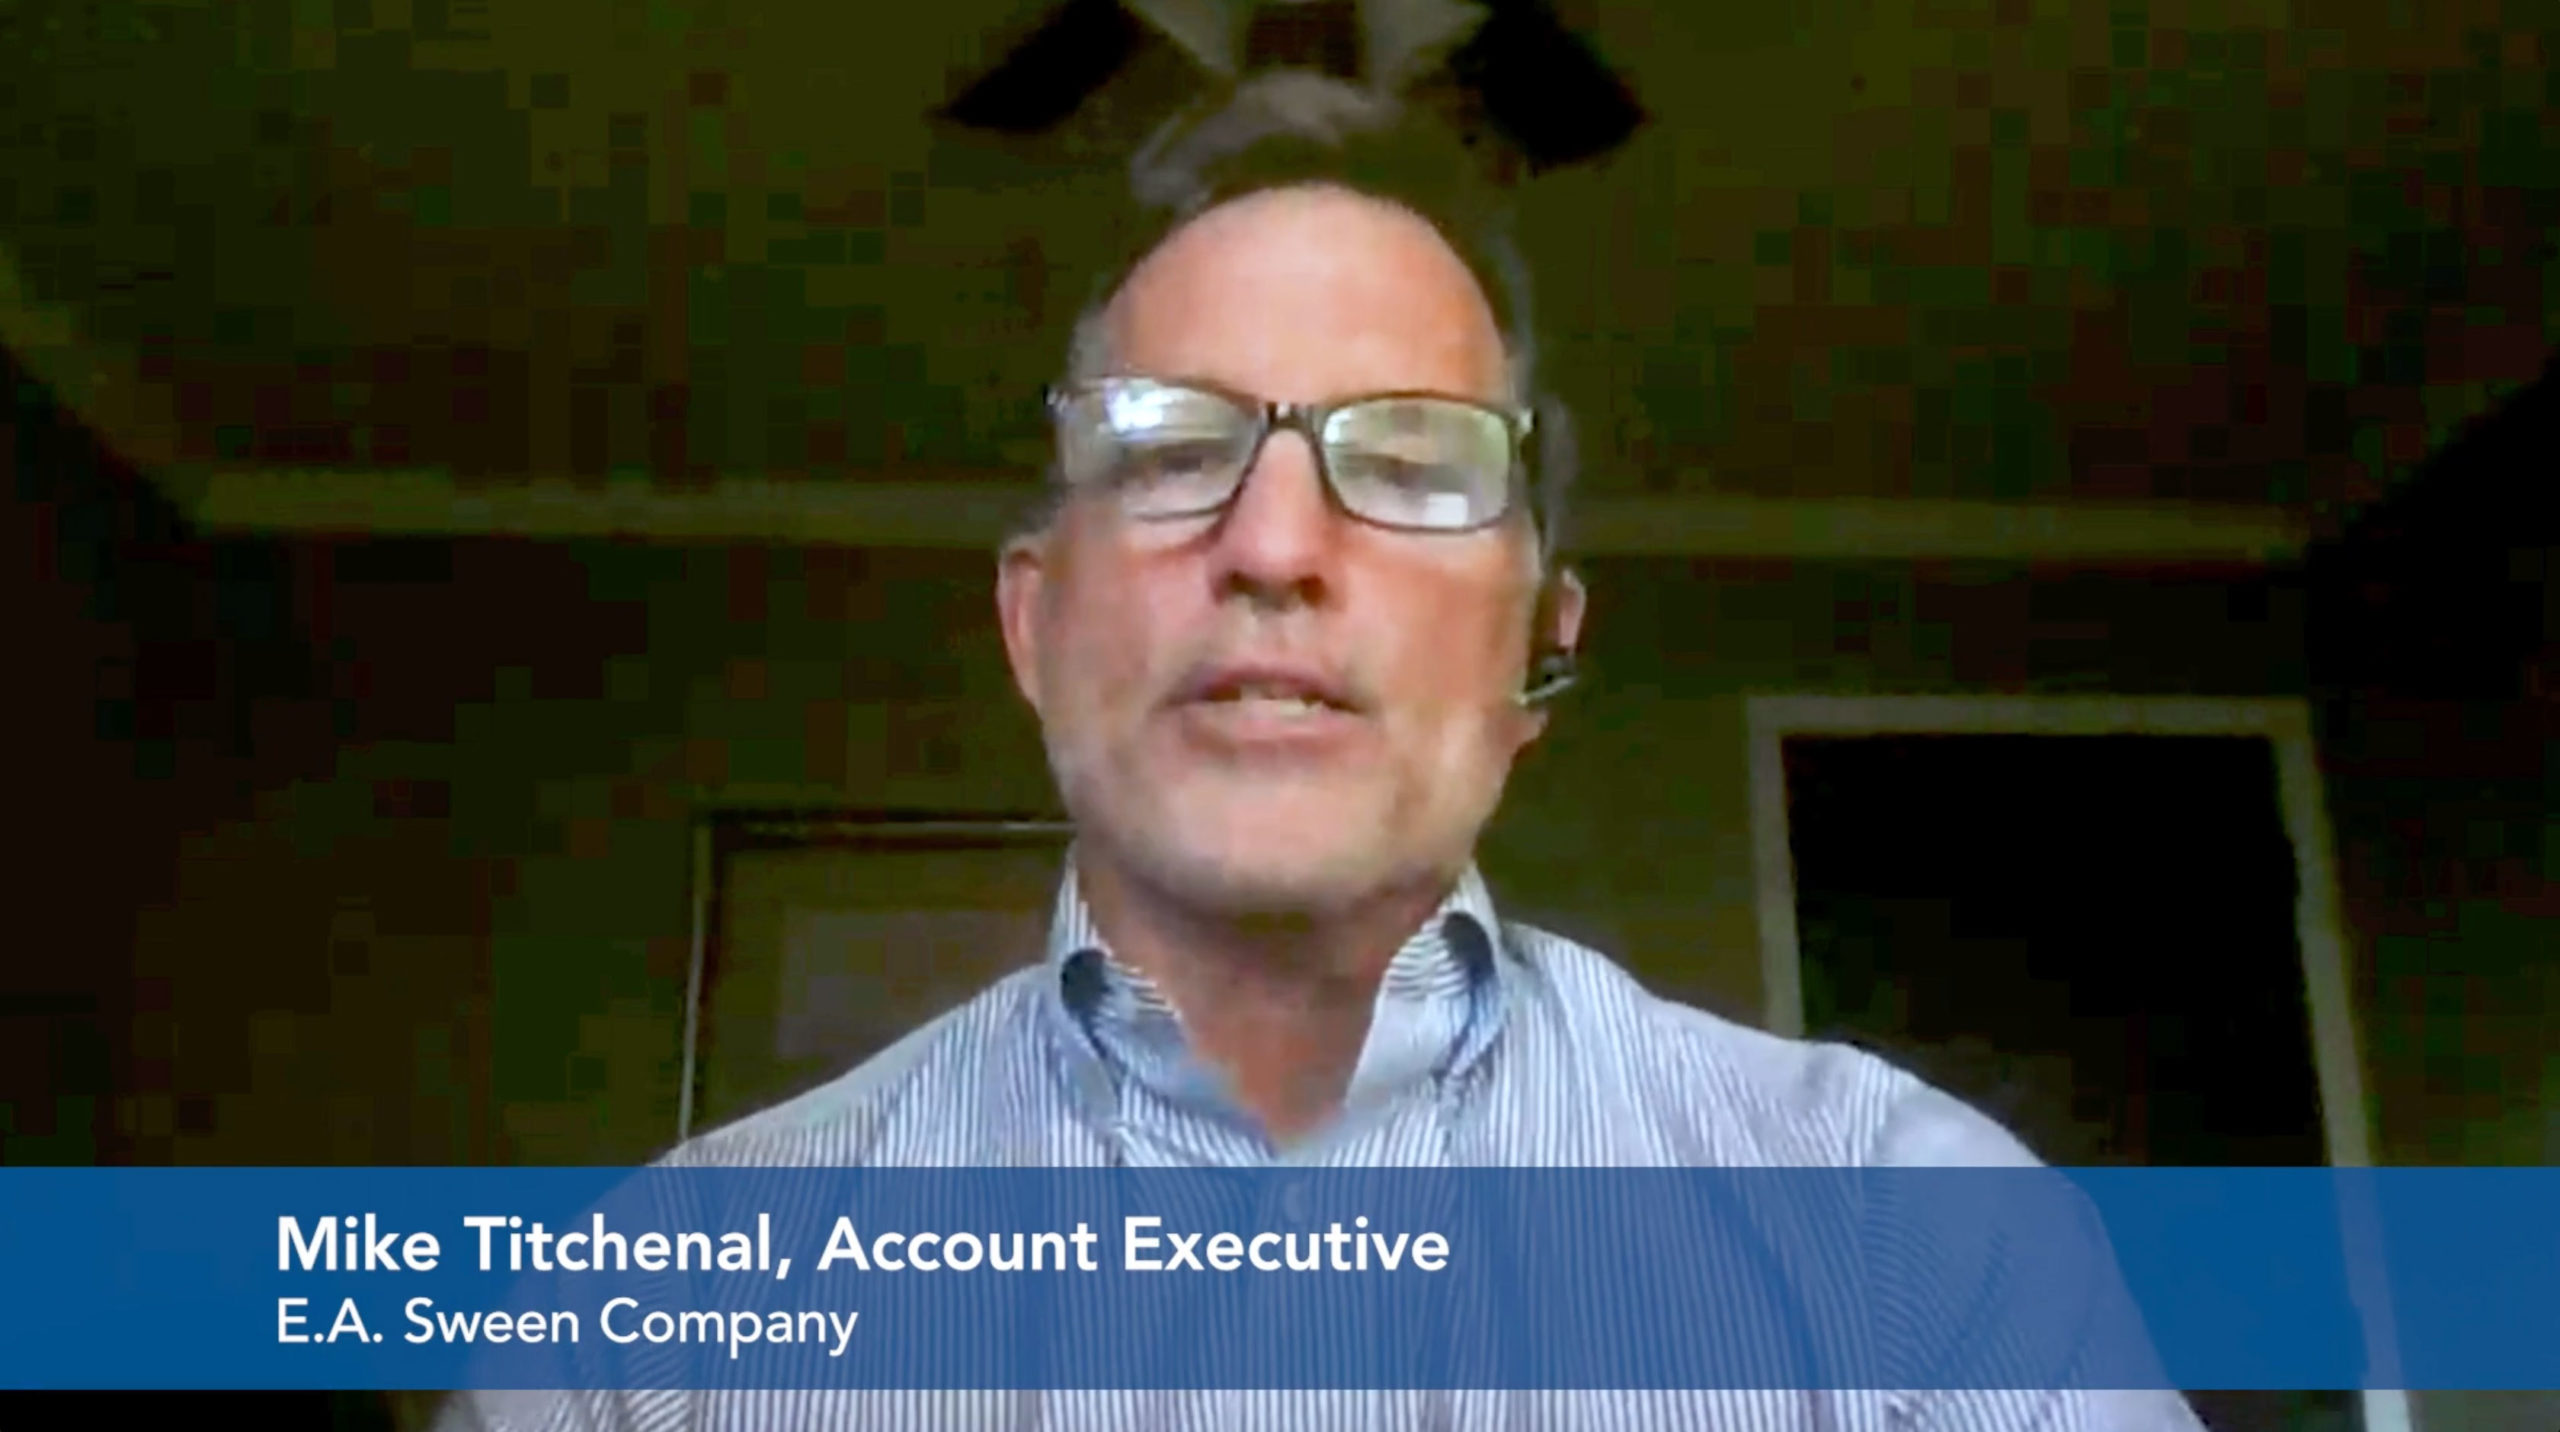 Mike Titchenal Account Executive Employee Interview at E. A. Sween Company